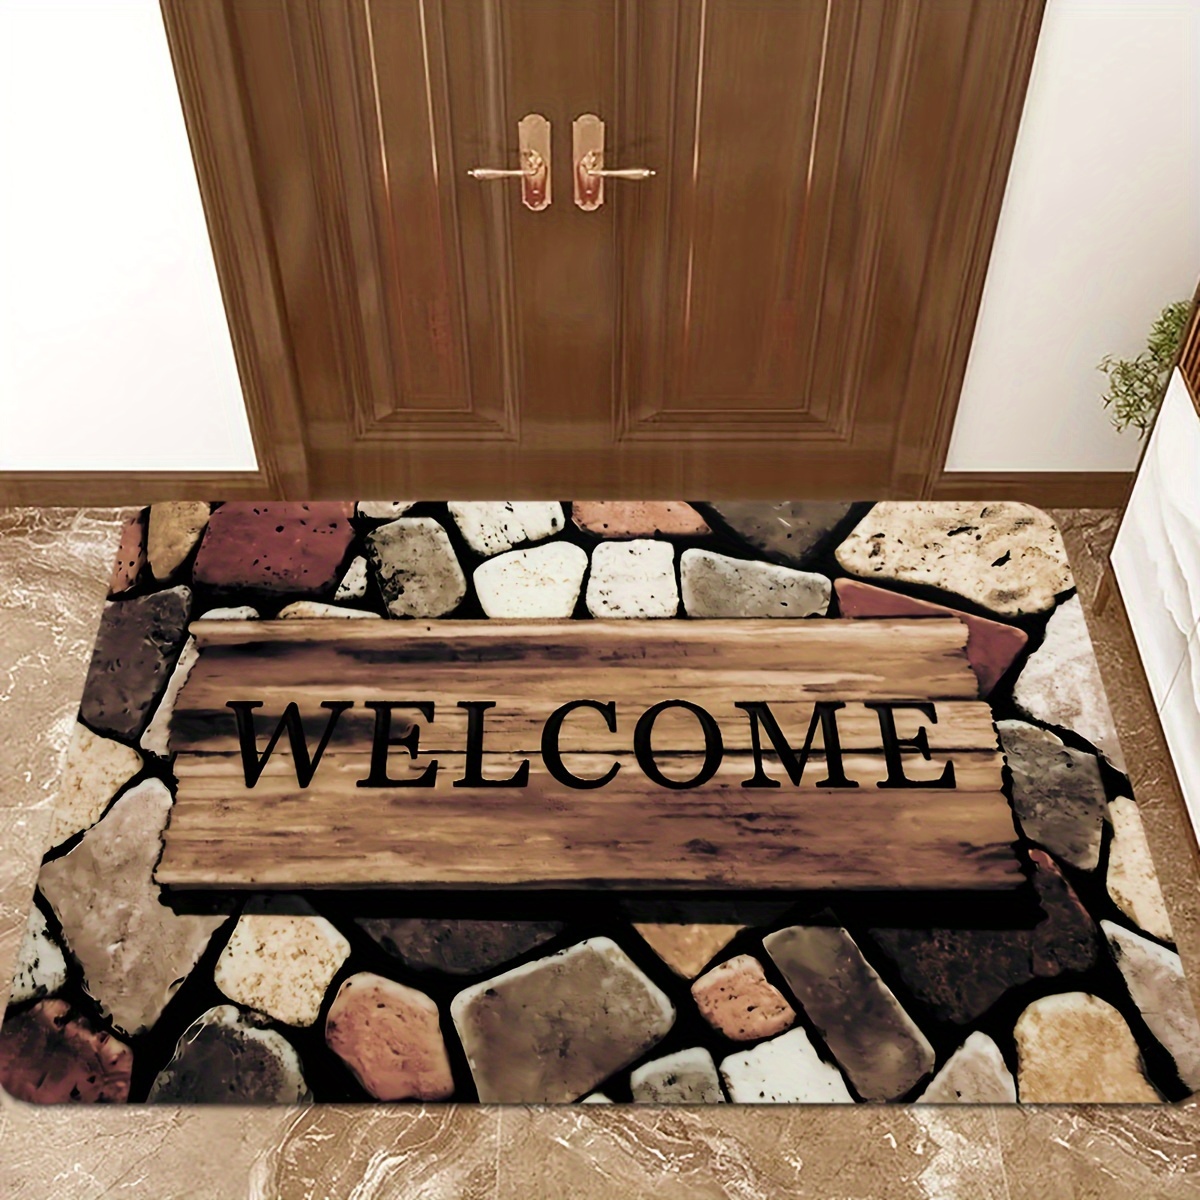 

1pc, Pebbles Design Print Entrance Floor Mat, With Non-slip Base, Non-slip & Stain Resistant, Quick Drying For Indoor/outdoor Use, Durable & Easy Maintenance Door Rug